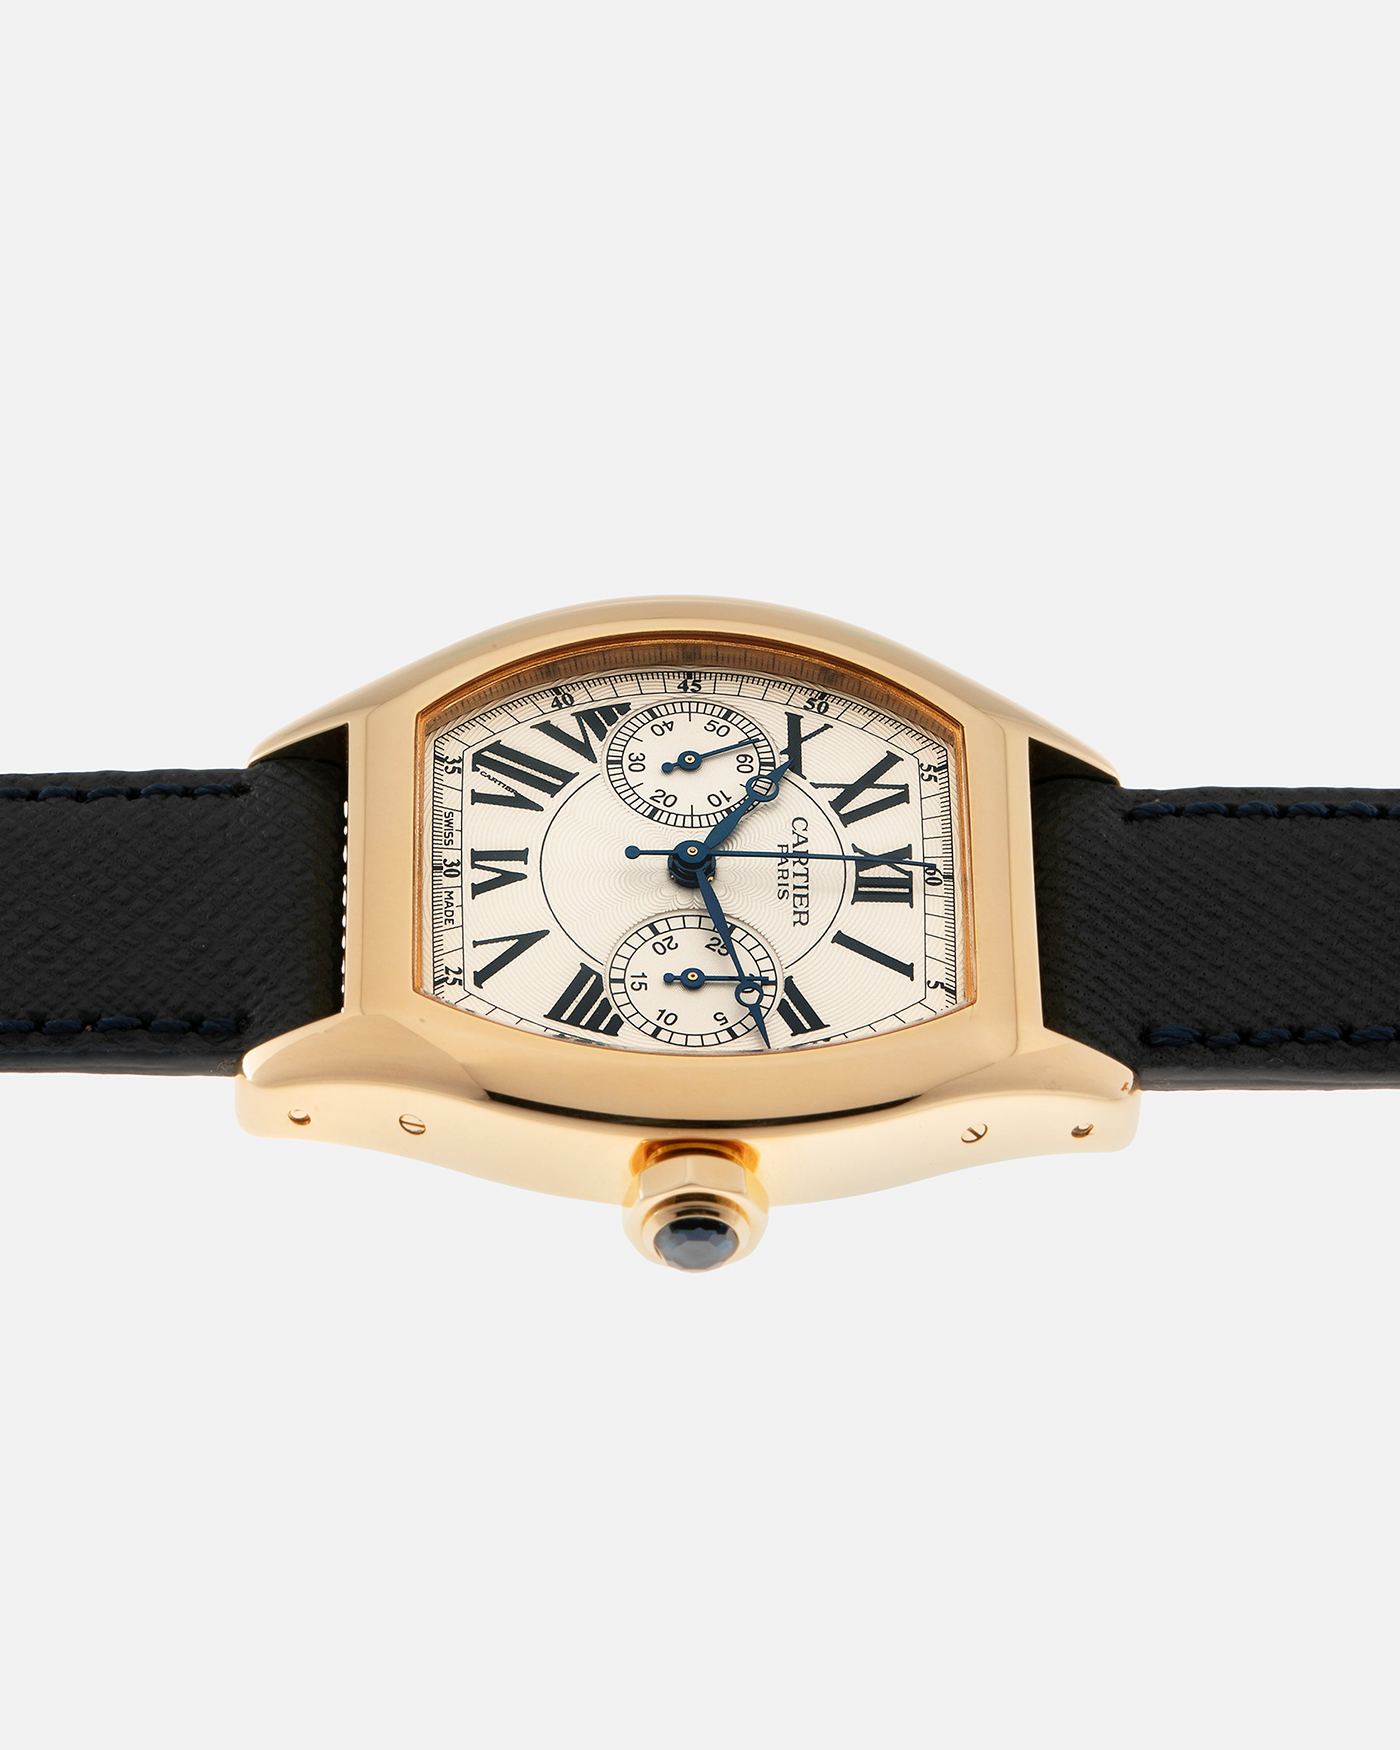 Brand: Cartier Year: 2000’s Model: Collection Privée Cartier Paris Tortue Monopoussoir Reference: 2356E Material: 18-carat Yellow Gold Movement: Cartier THA Cal. 045MC, Manual-Winding Case Diameter: 43mm x 35 mm Lug Width: 18mm Strap: Molequin Navy Blue Textured Calf Leather with Signed 18-carat Yellow Gold Deployant Clasp